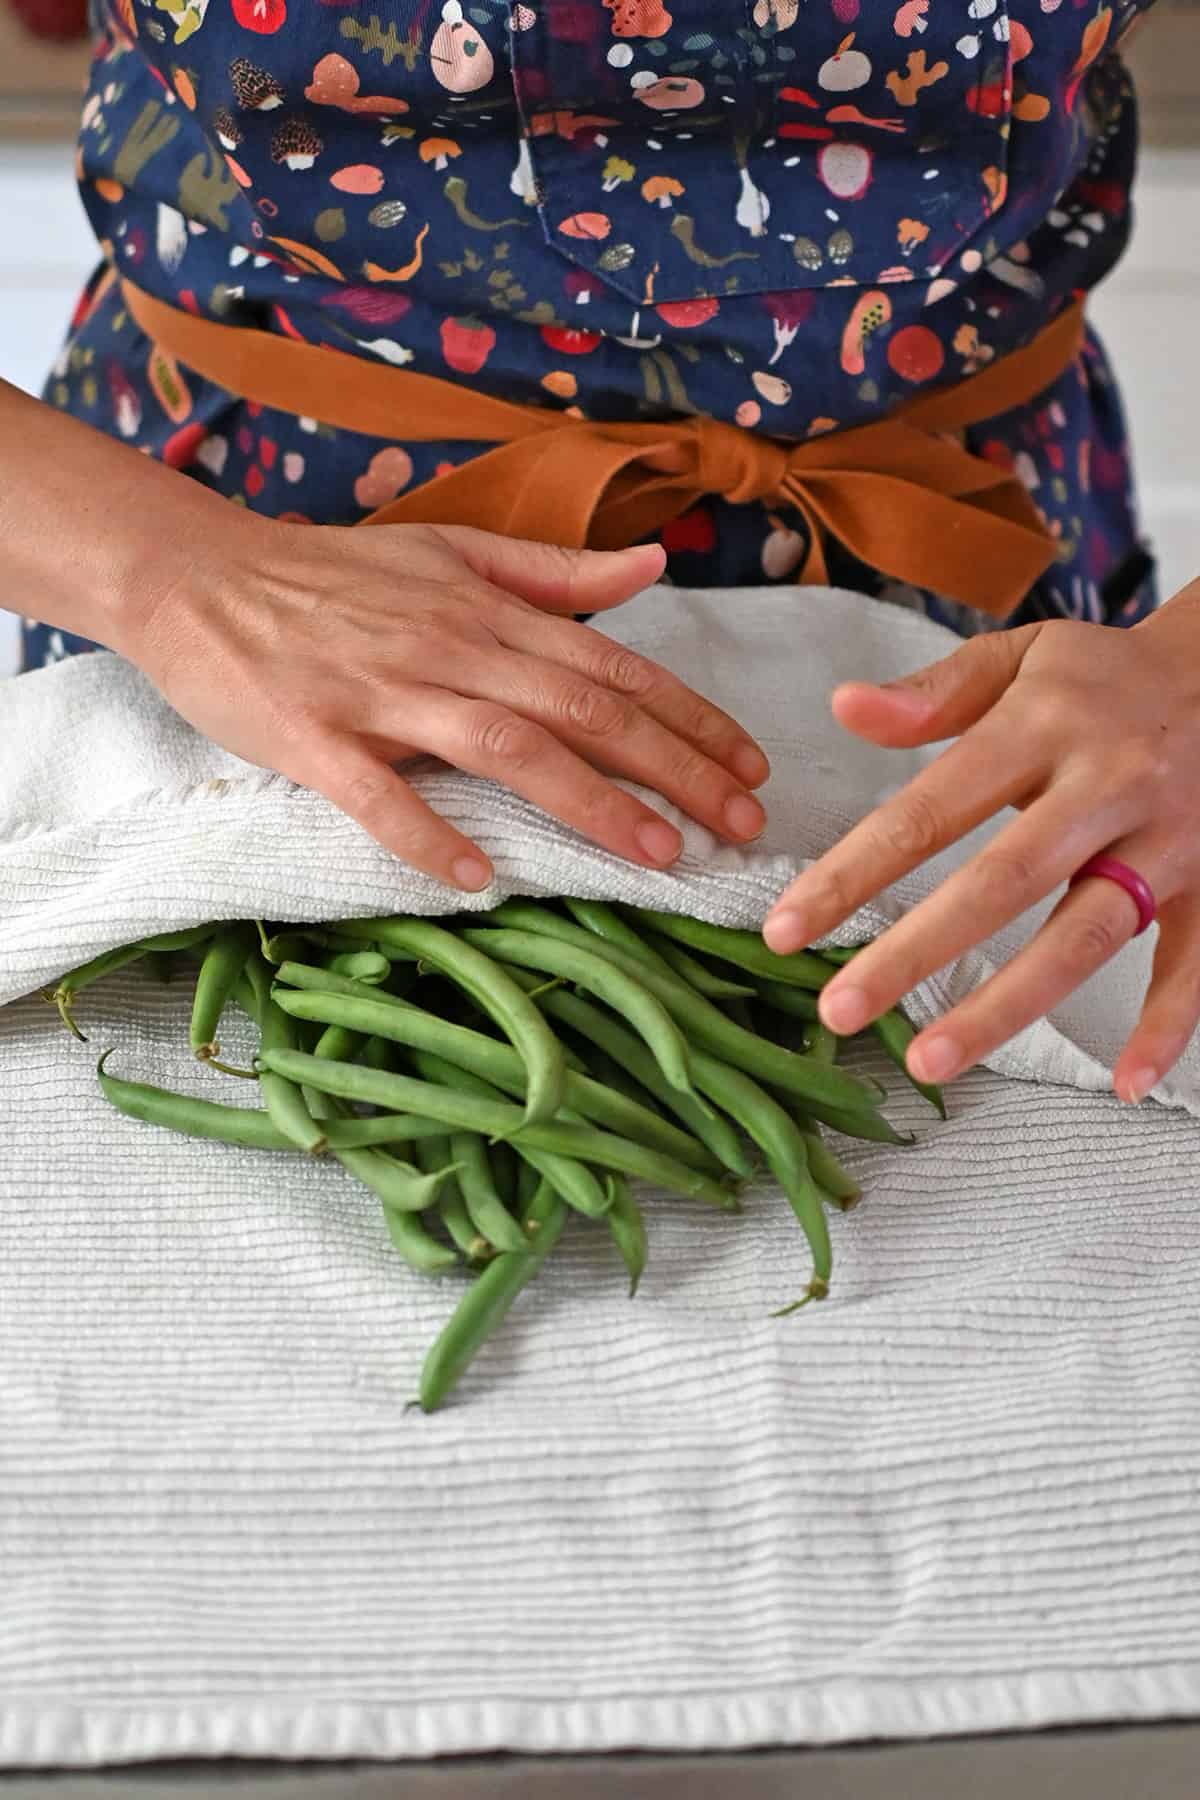 Patting washed raw green beans dry with a clean kitchen towel before cooking them.